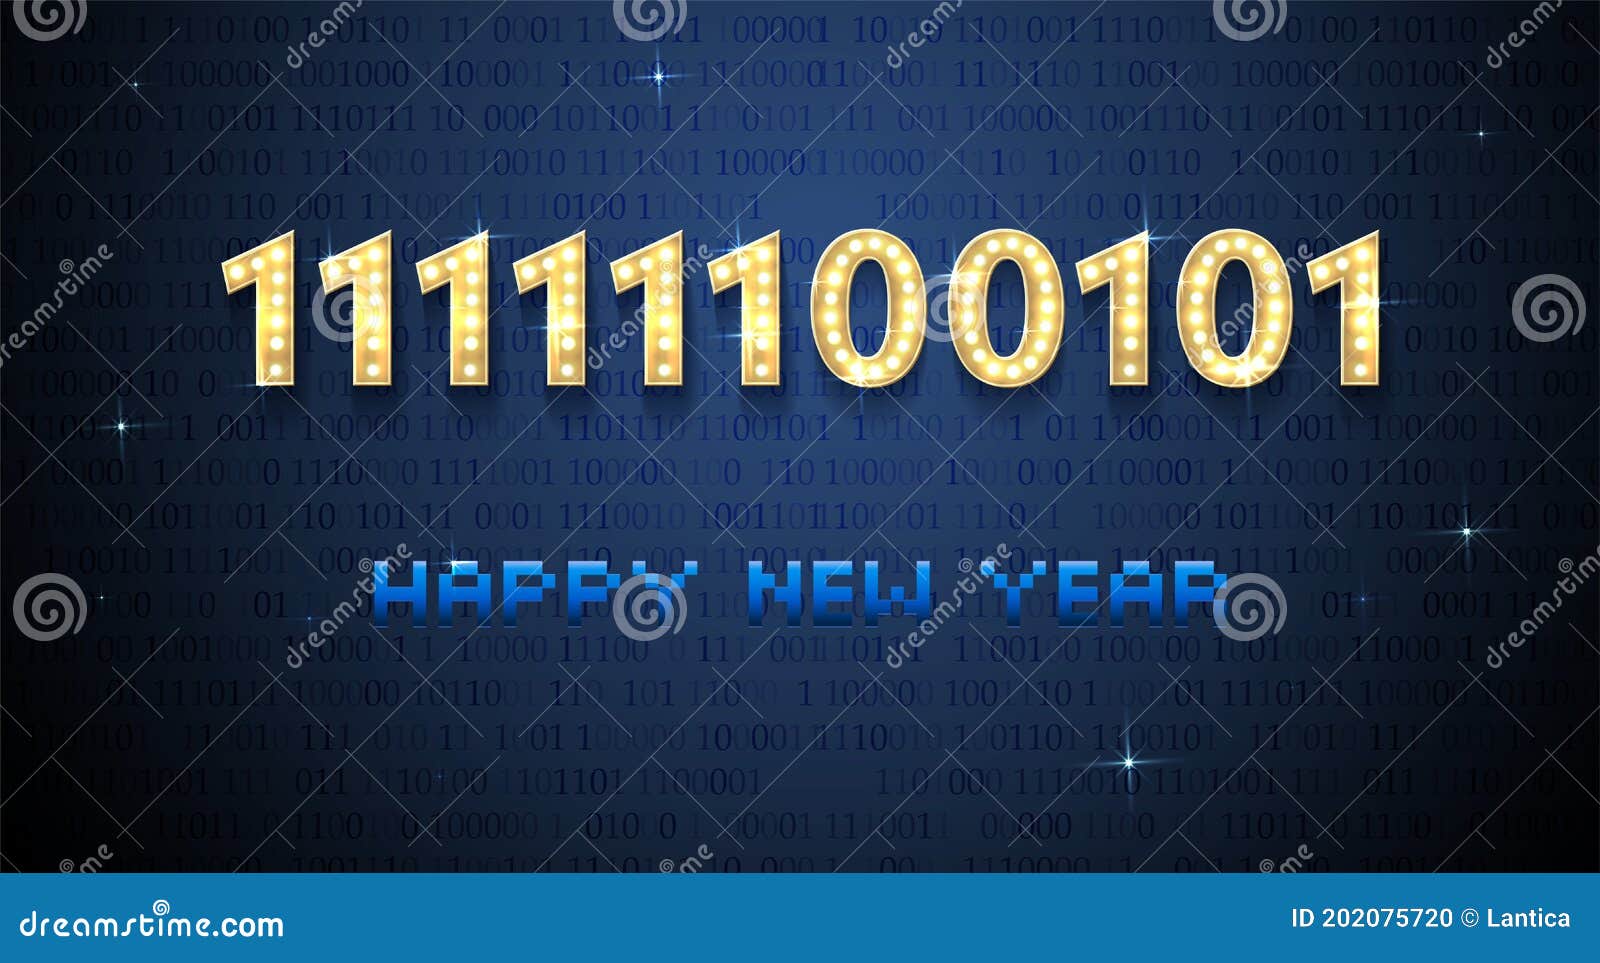 100,000 Happy new year Vector Images